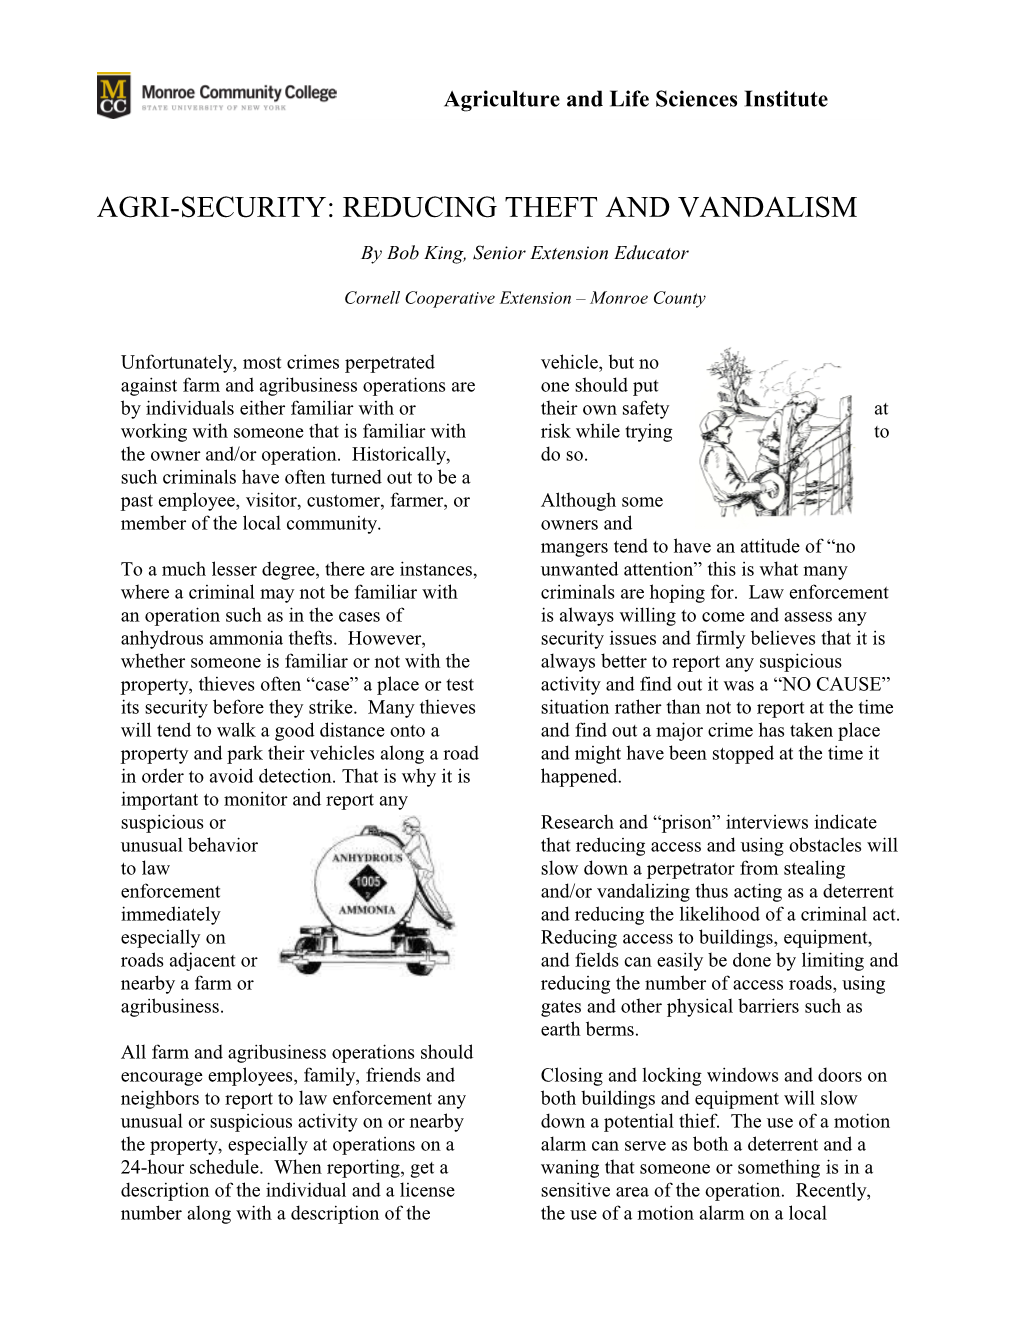 Agri-Security: Reducing Theft and Vandalism